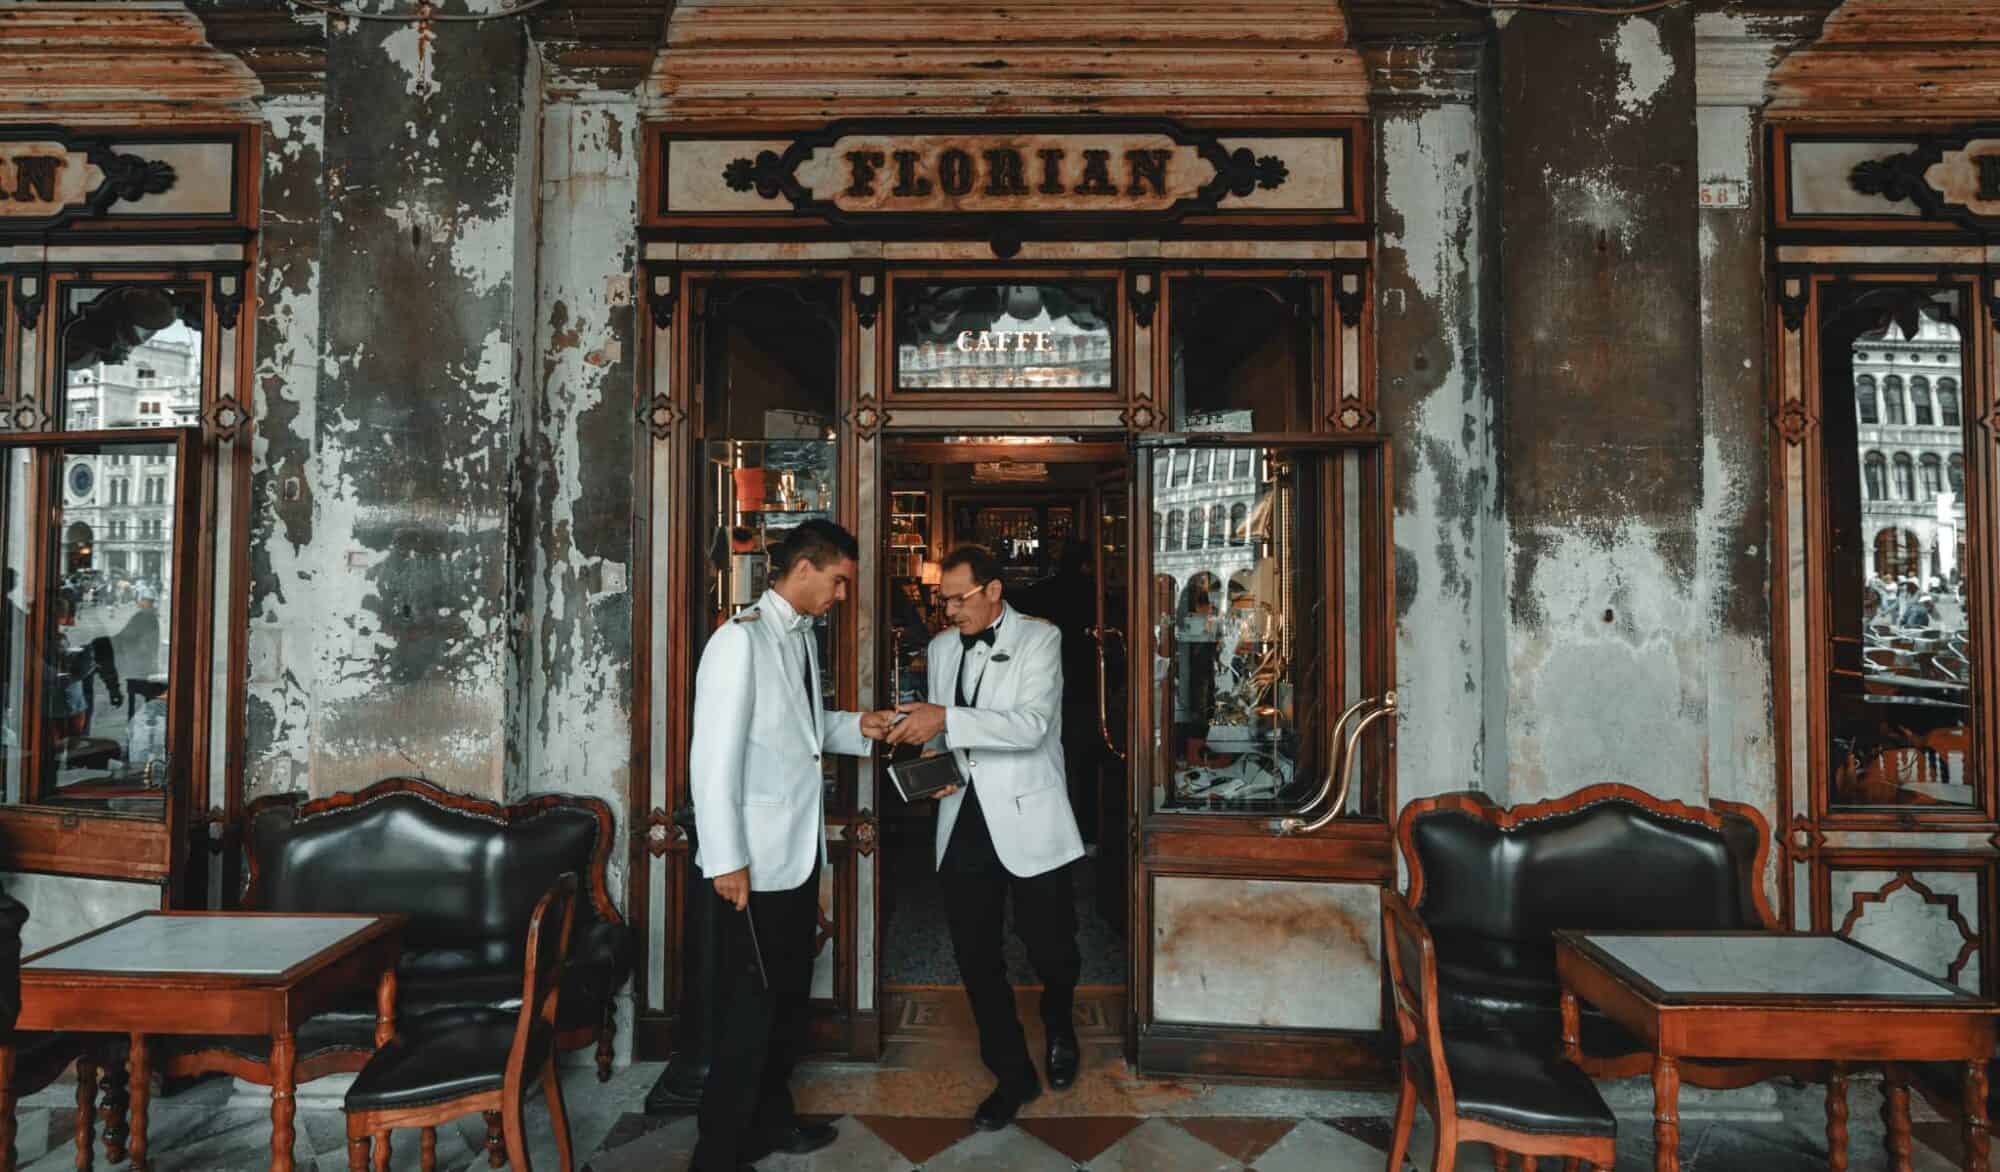 Two waiters in white jackets stand outside the Florian caffè in Italy.